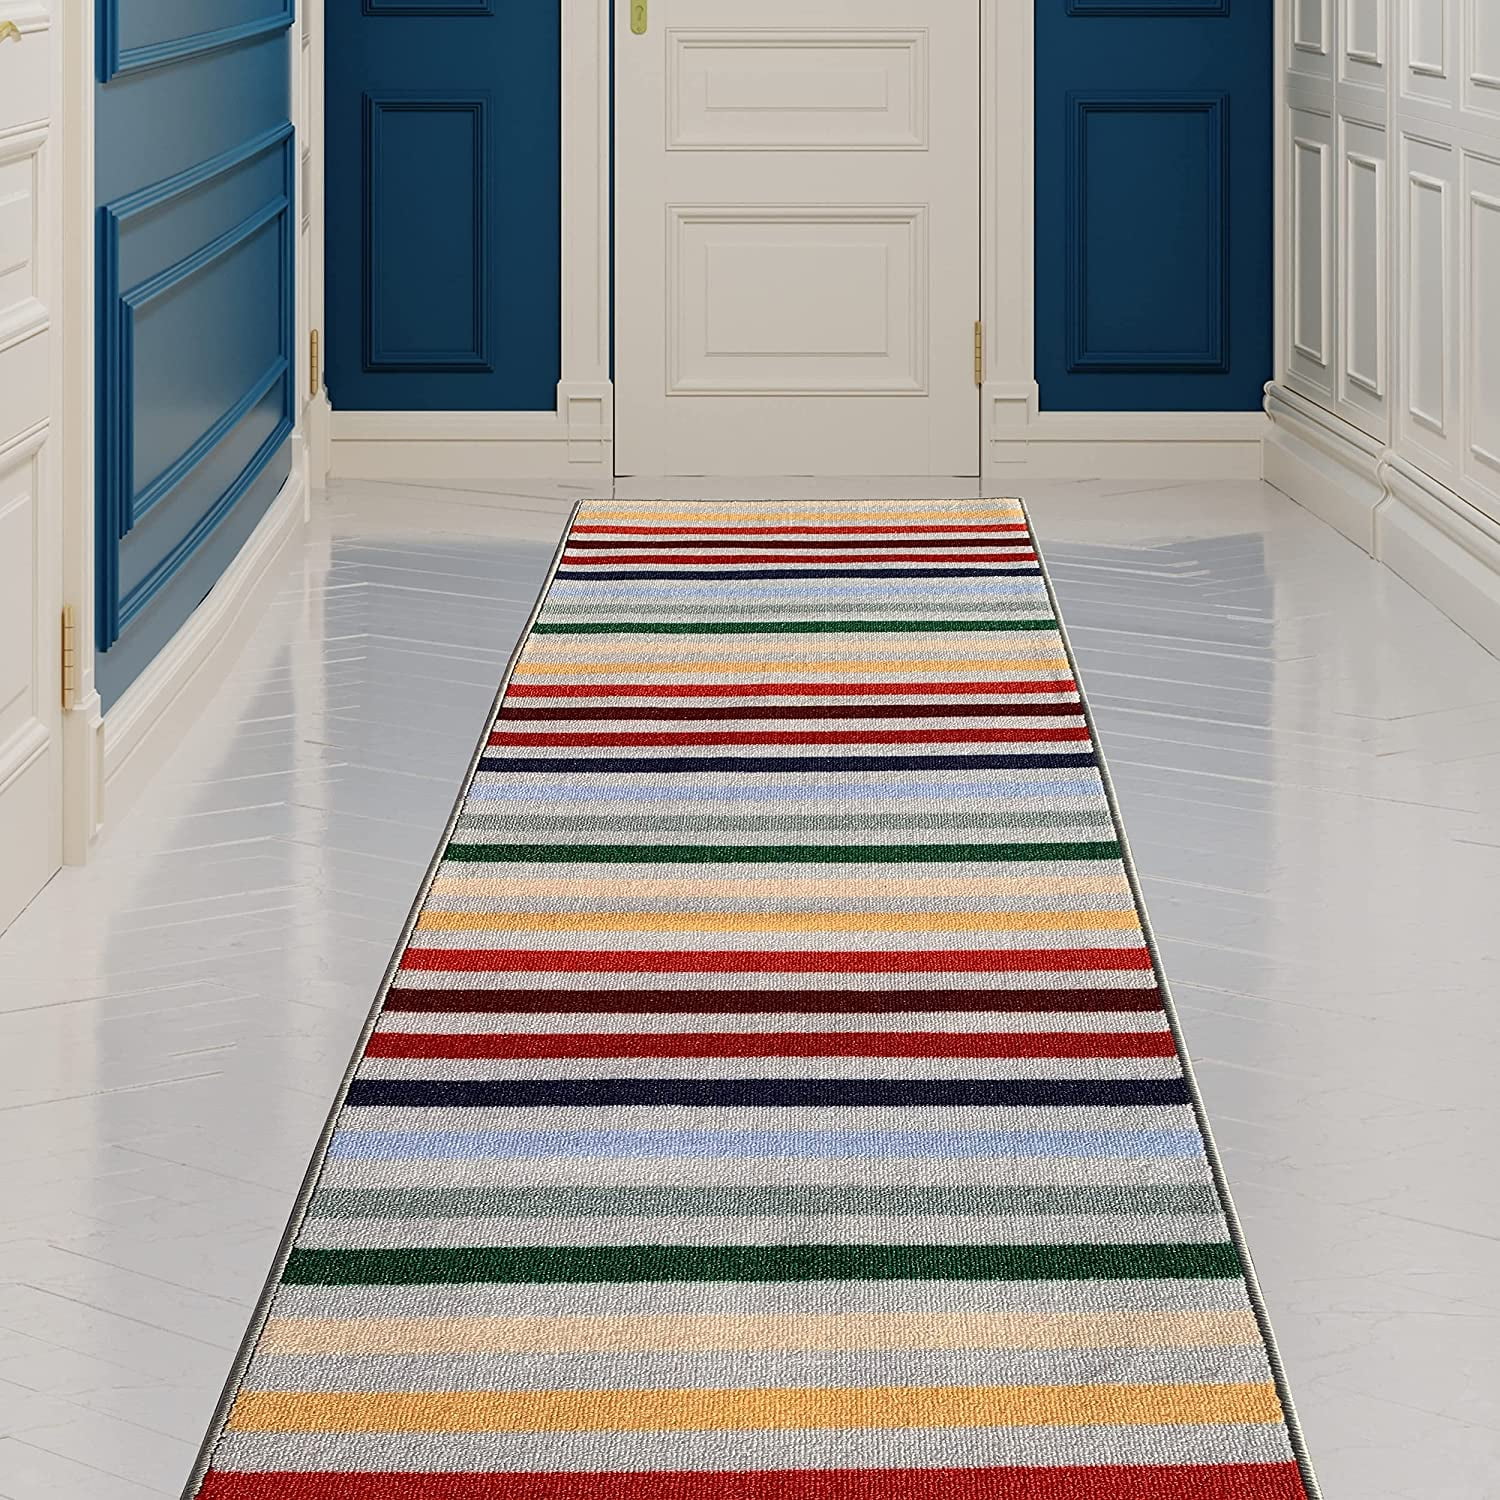 Details about   Modern Hall Runner Rug Long Hallway Area Carpet Non Slip Rubber by Ottomanson 